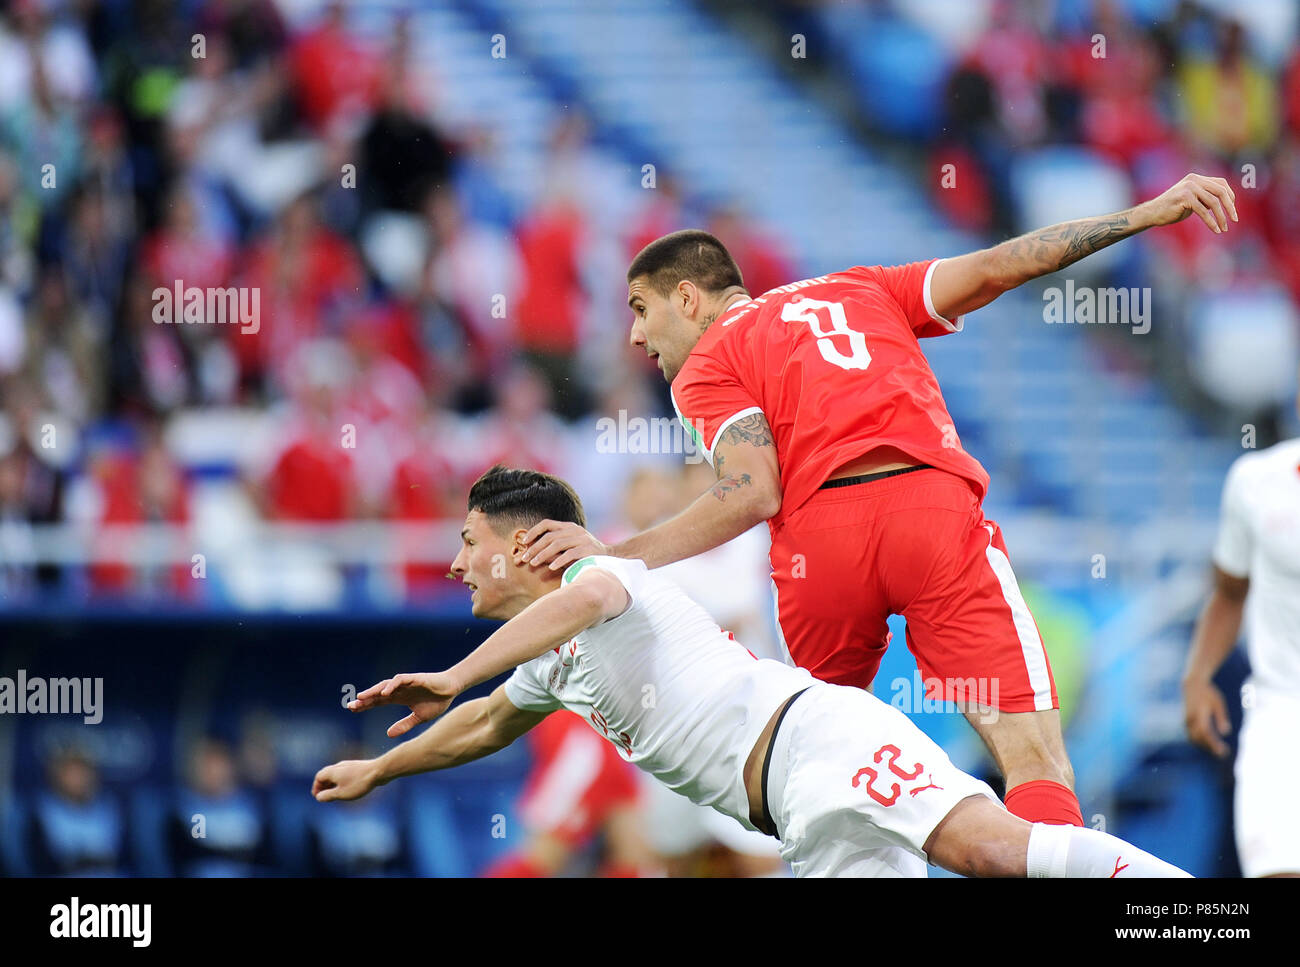 KALININGRAD, RUSSIA - JUNE 22: Aleksandar Mitrovic of Serbia scores a goal during the 2018 FIFA World Cup Russia group E match between Serbia and Switzerland at Kaliningrad Stadium on June 22, 2018 in Kaliningrad, Russia. (Photo by Norbert Barczyk/PressFocus/MB Media) Stock Photo